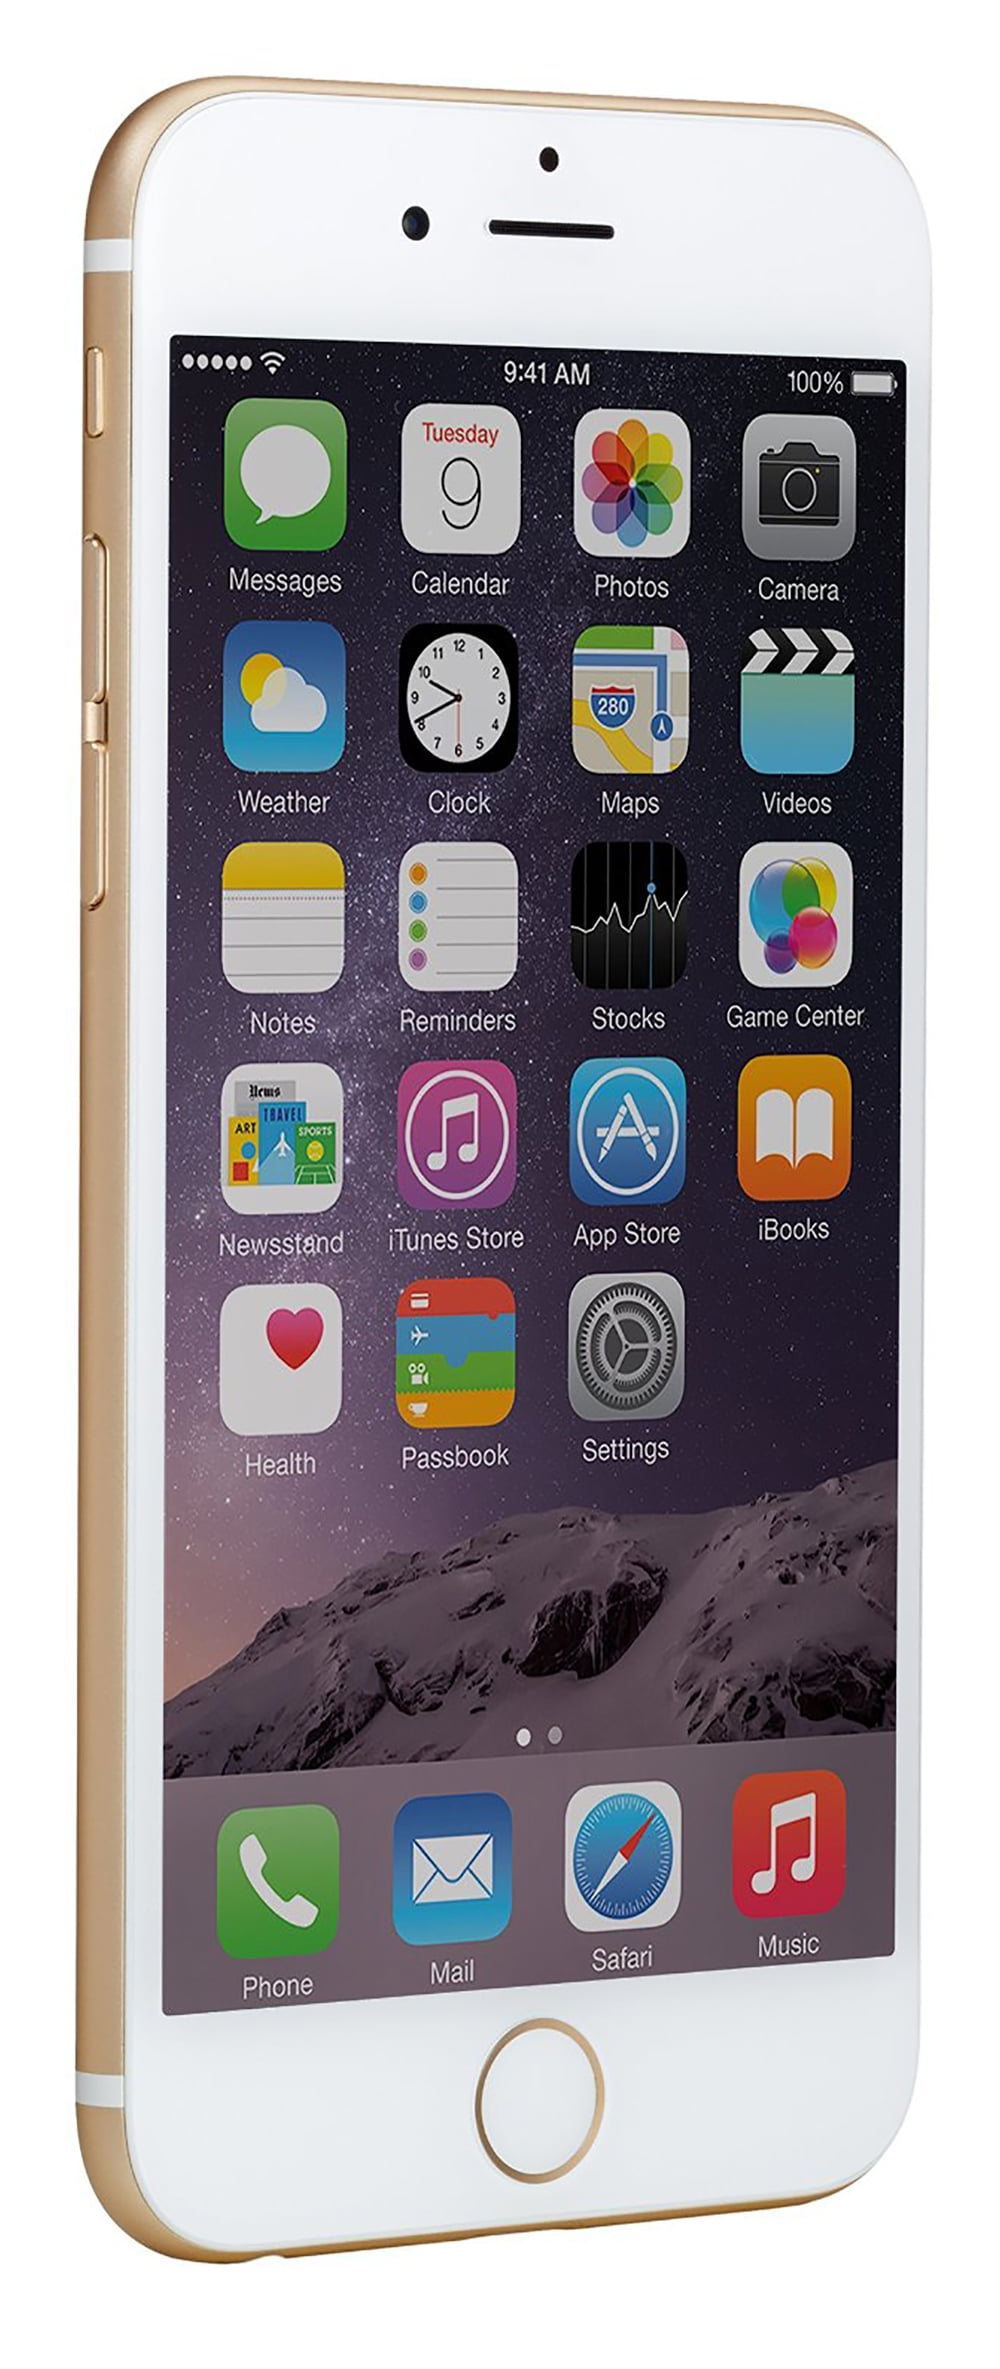 Pre-Owned Apple iPhone 6 16GB Gold LTE Cellular AT&T MG4Q2LL/A  (Refurbished: Good)